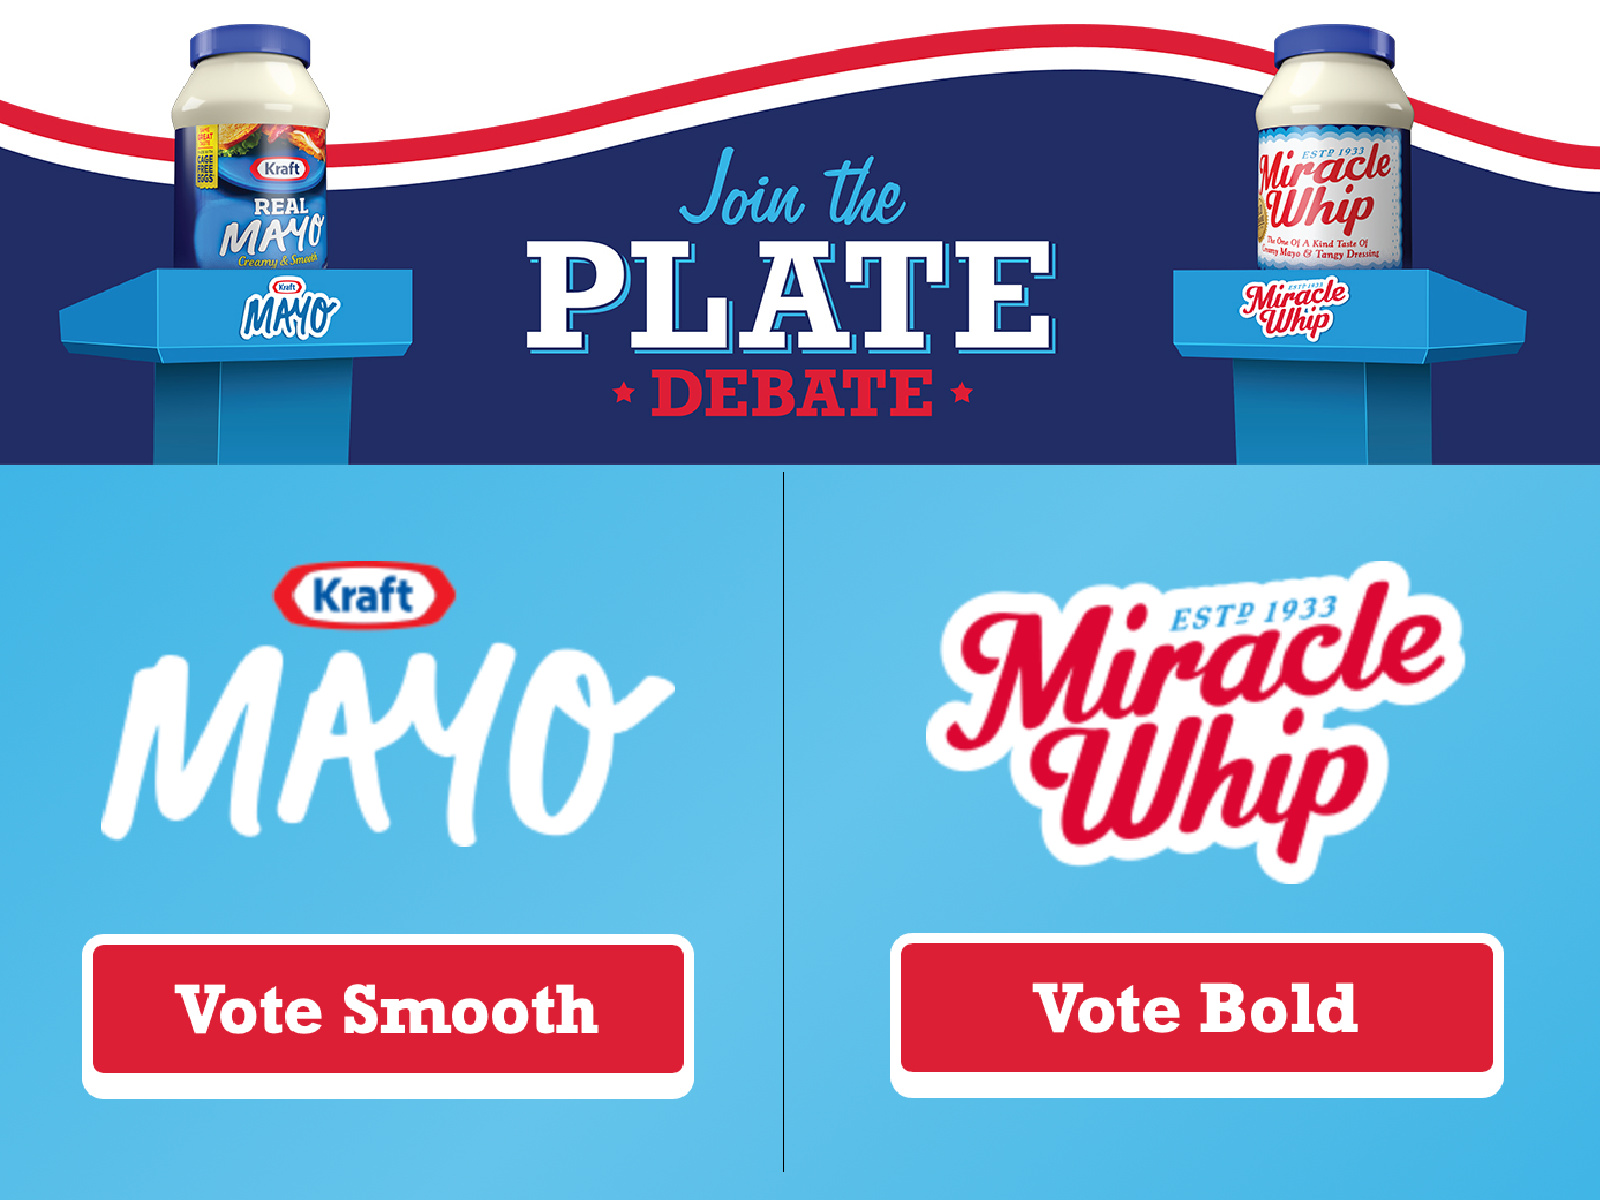 Voice Your Choice In The Plate Debate For A Chance To Win BIG! on I Heart Publix